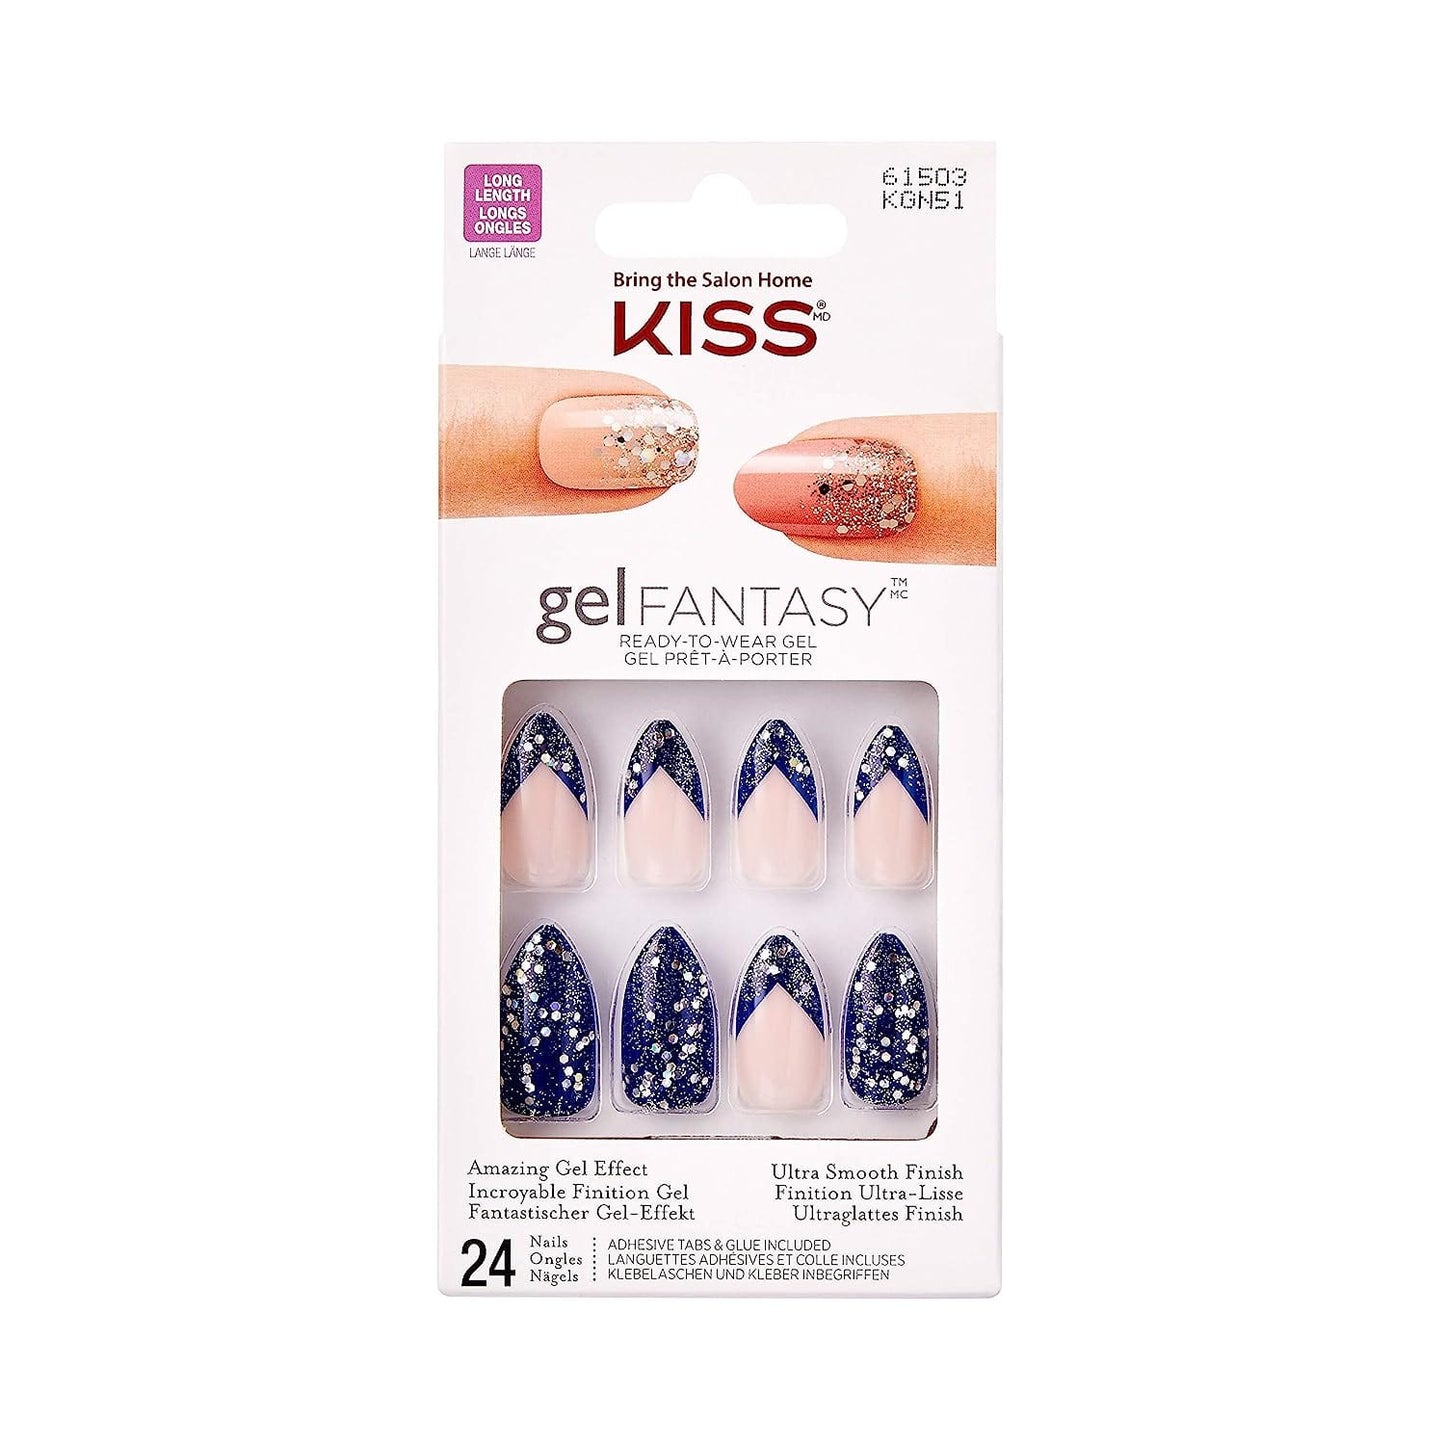 Kiss Gel Fantasy Nail Collection Ready-to-Wear Gel Manicure FG